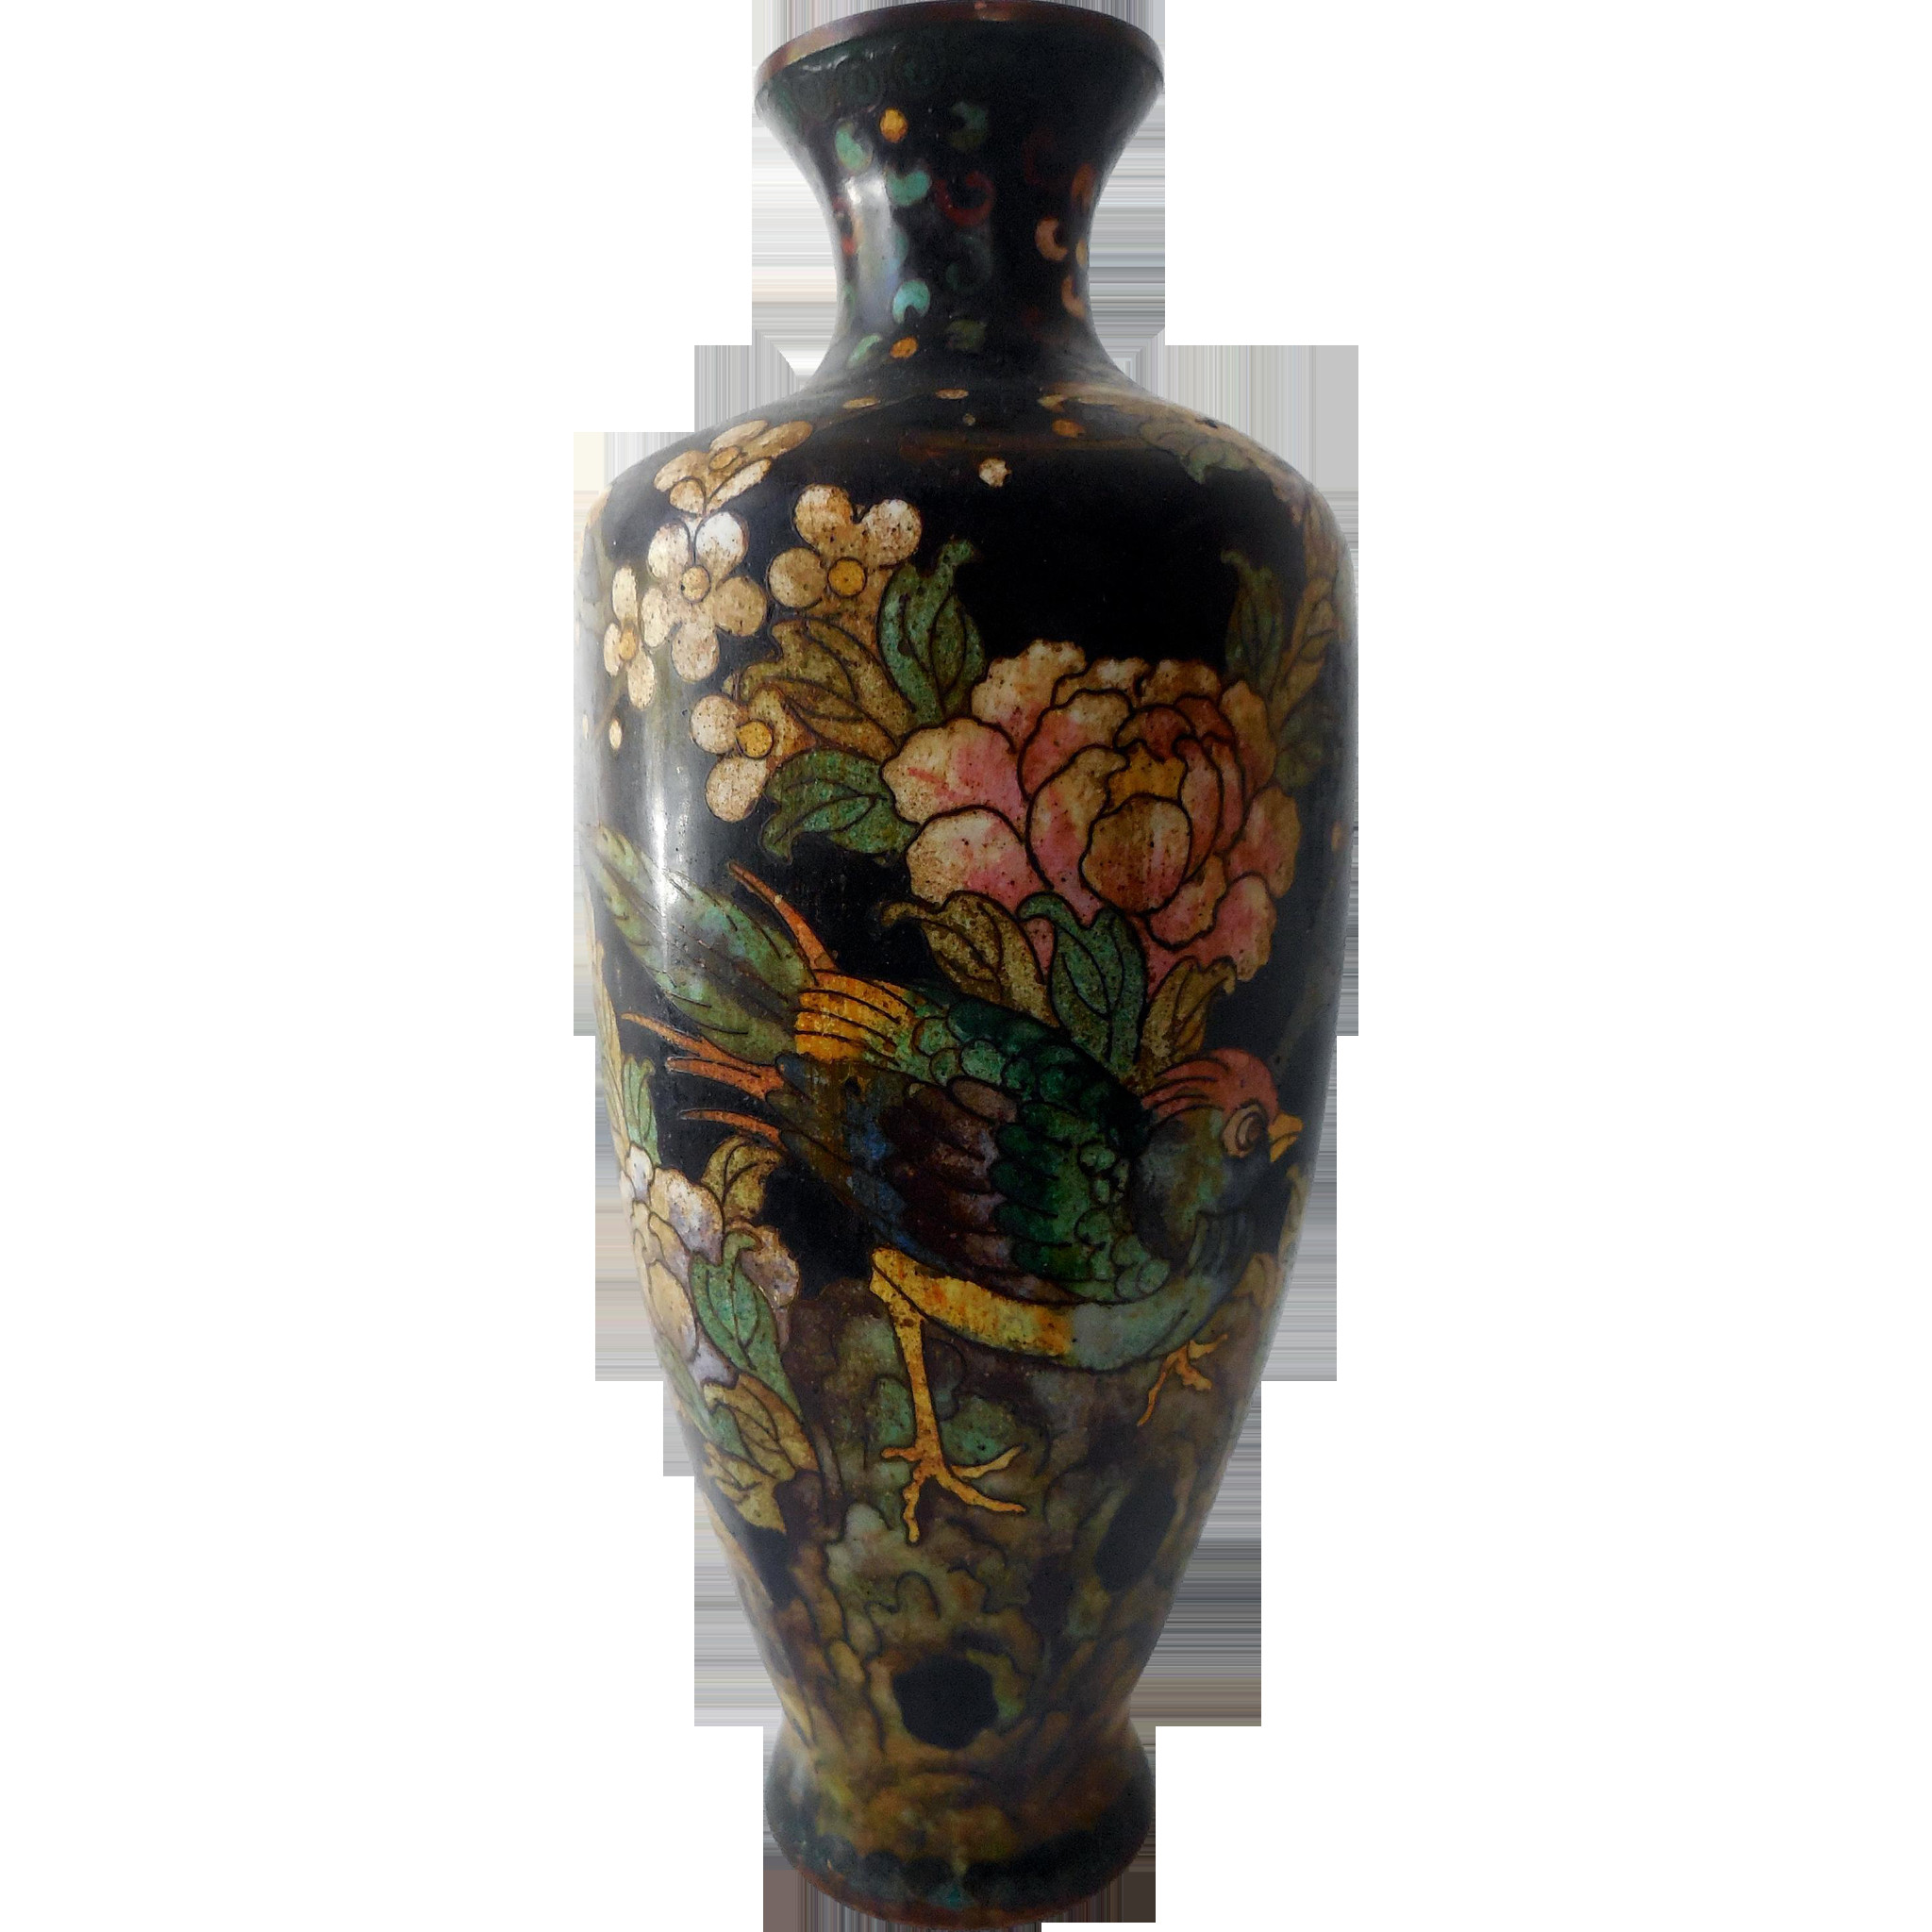 20 attractive Antique Chinese Vases 2023 free download antique chinese vases of antique chinese cloisonne vase 19th c great ming mark japanese pertaining to antique chinese cloisonne vase 19th c great ming mark